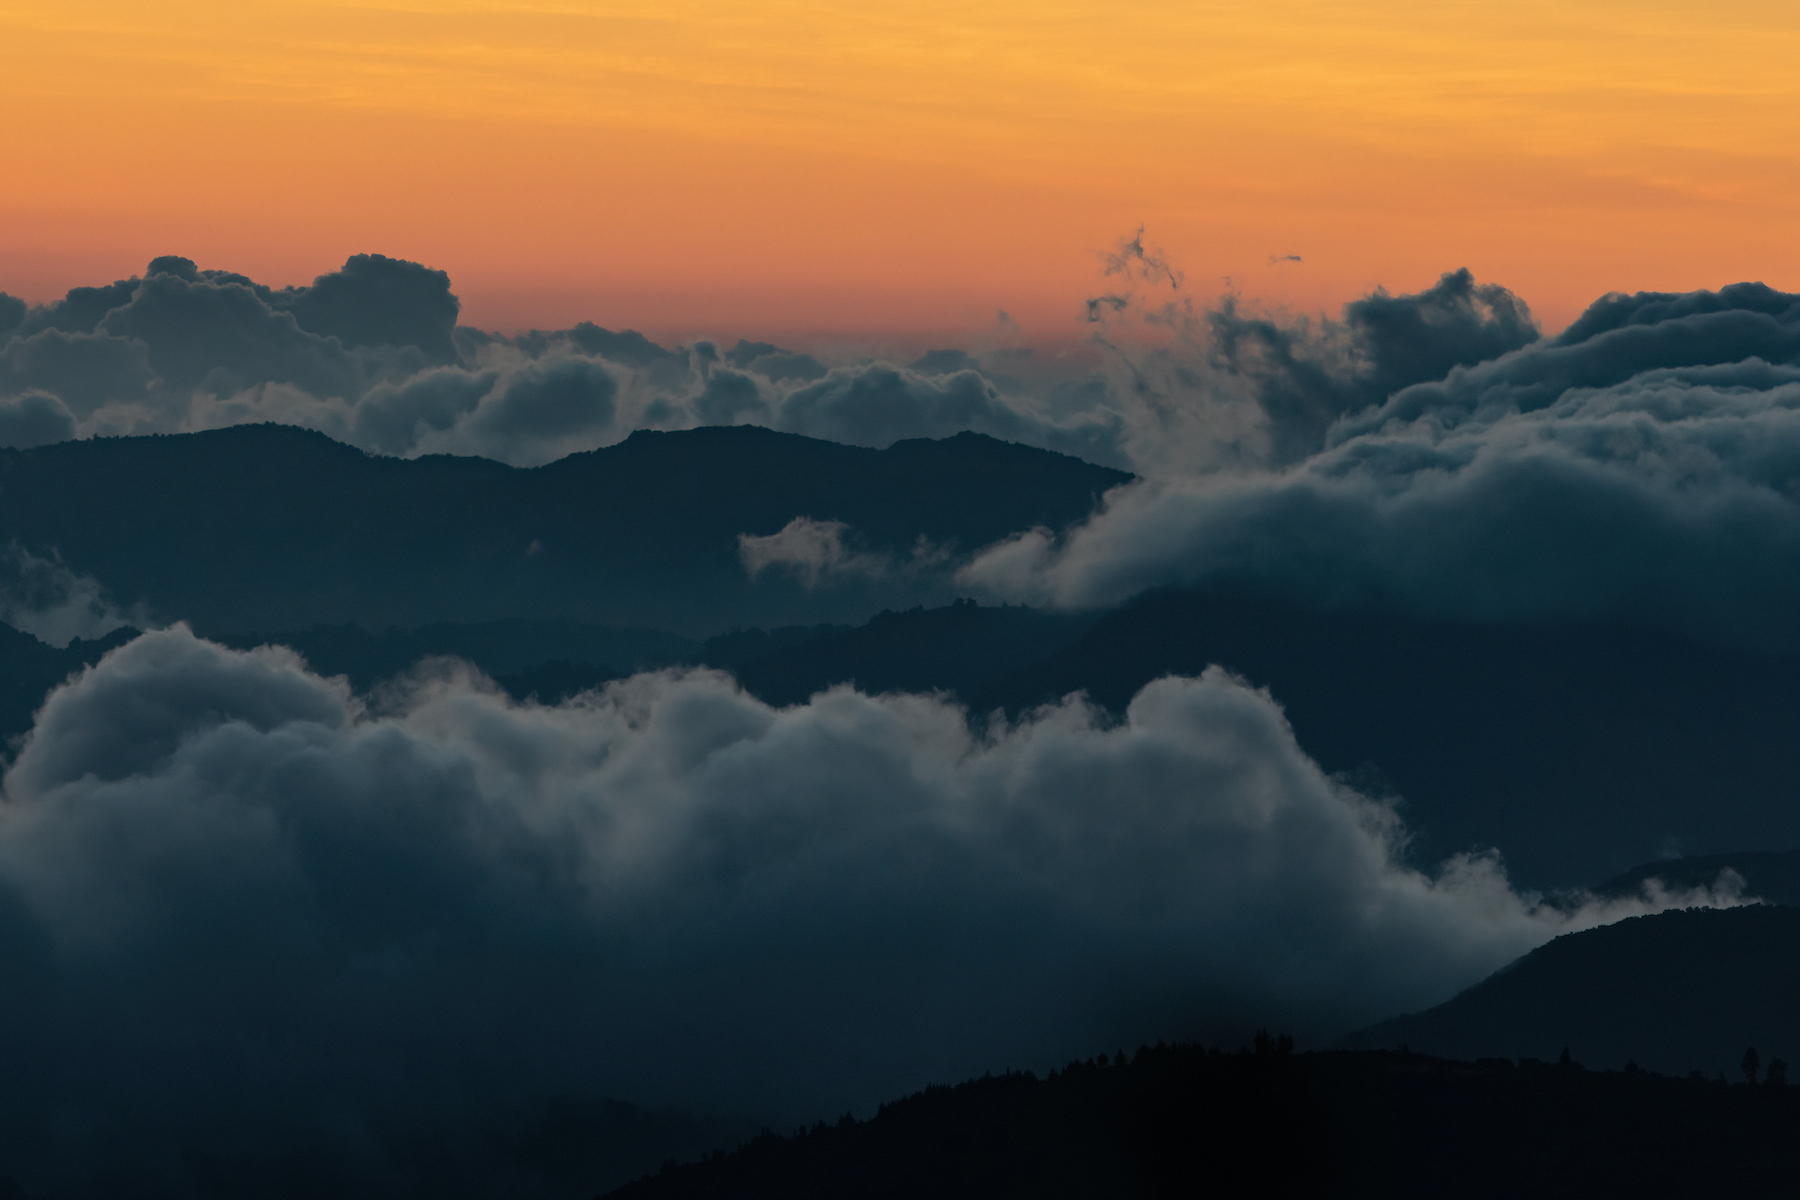 Sunrise in the heavens of Costa Rica's cloud forests during our wildlife photography tour